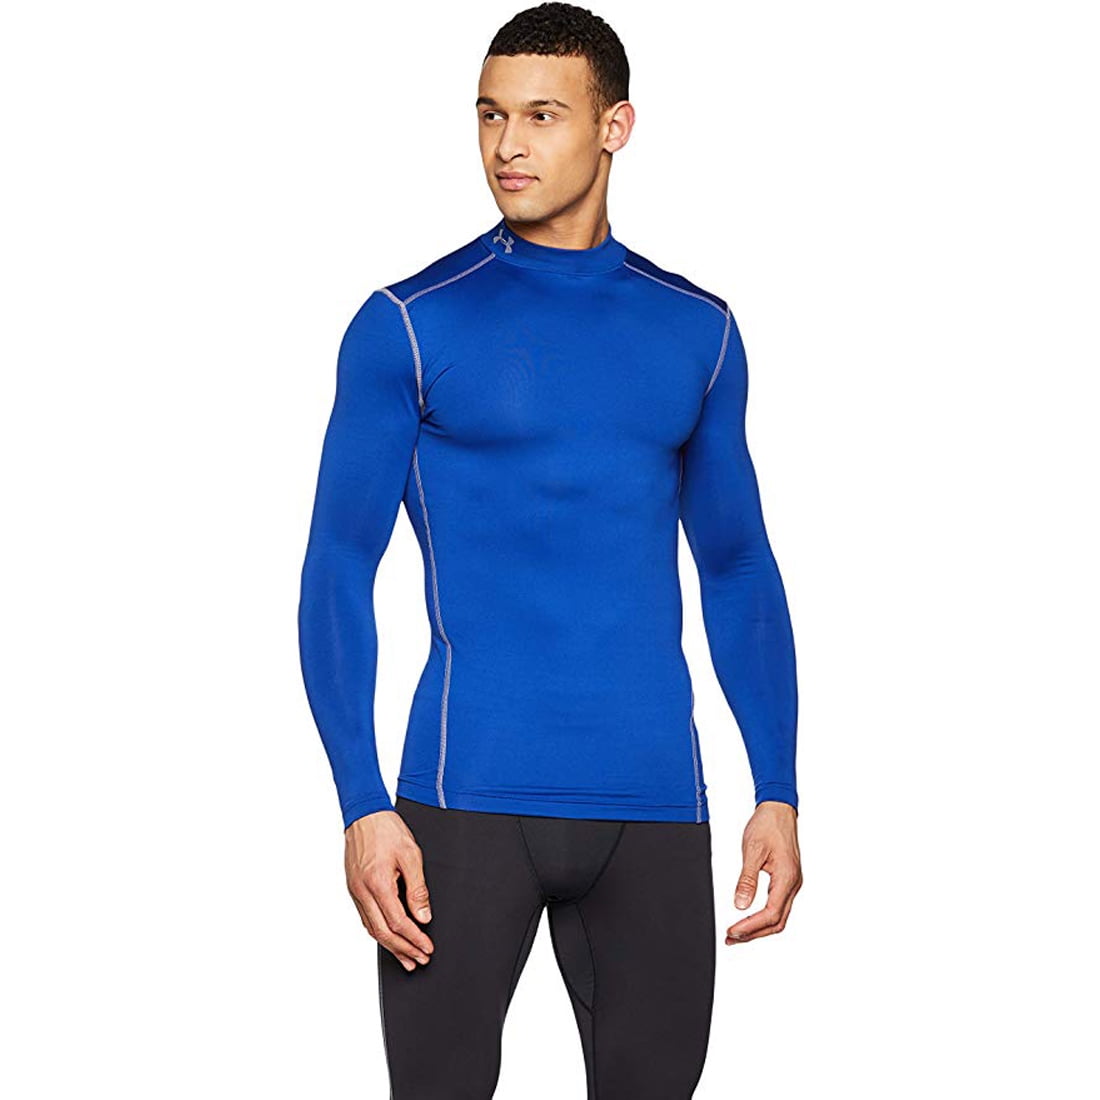 Defender Mens Thermal ColdGear Quick Dry Compression Mock Long Sleeve T Shirts